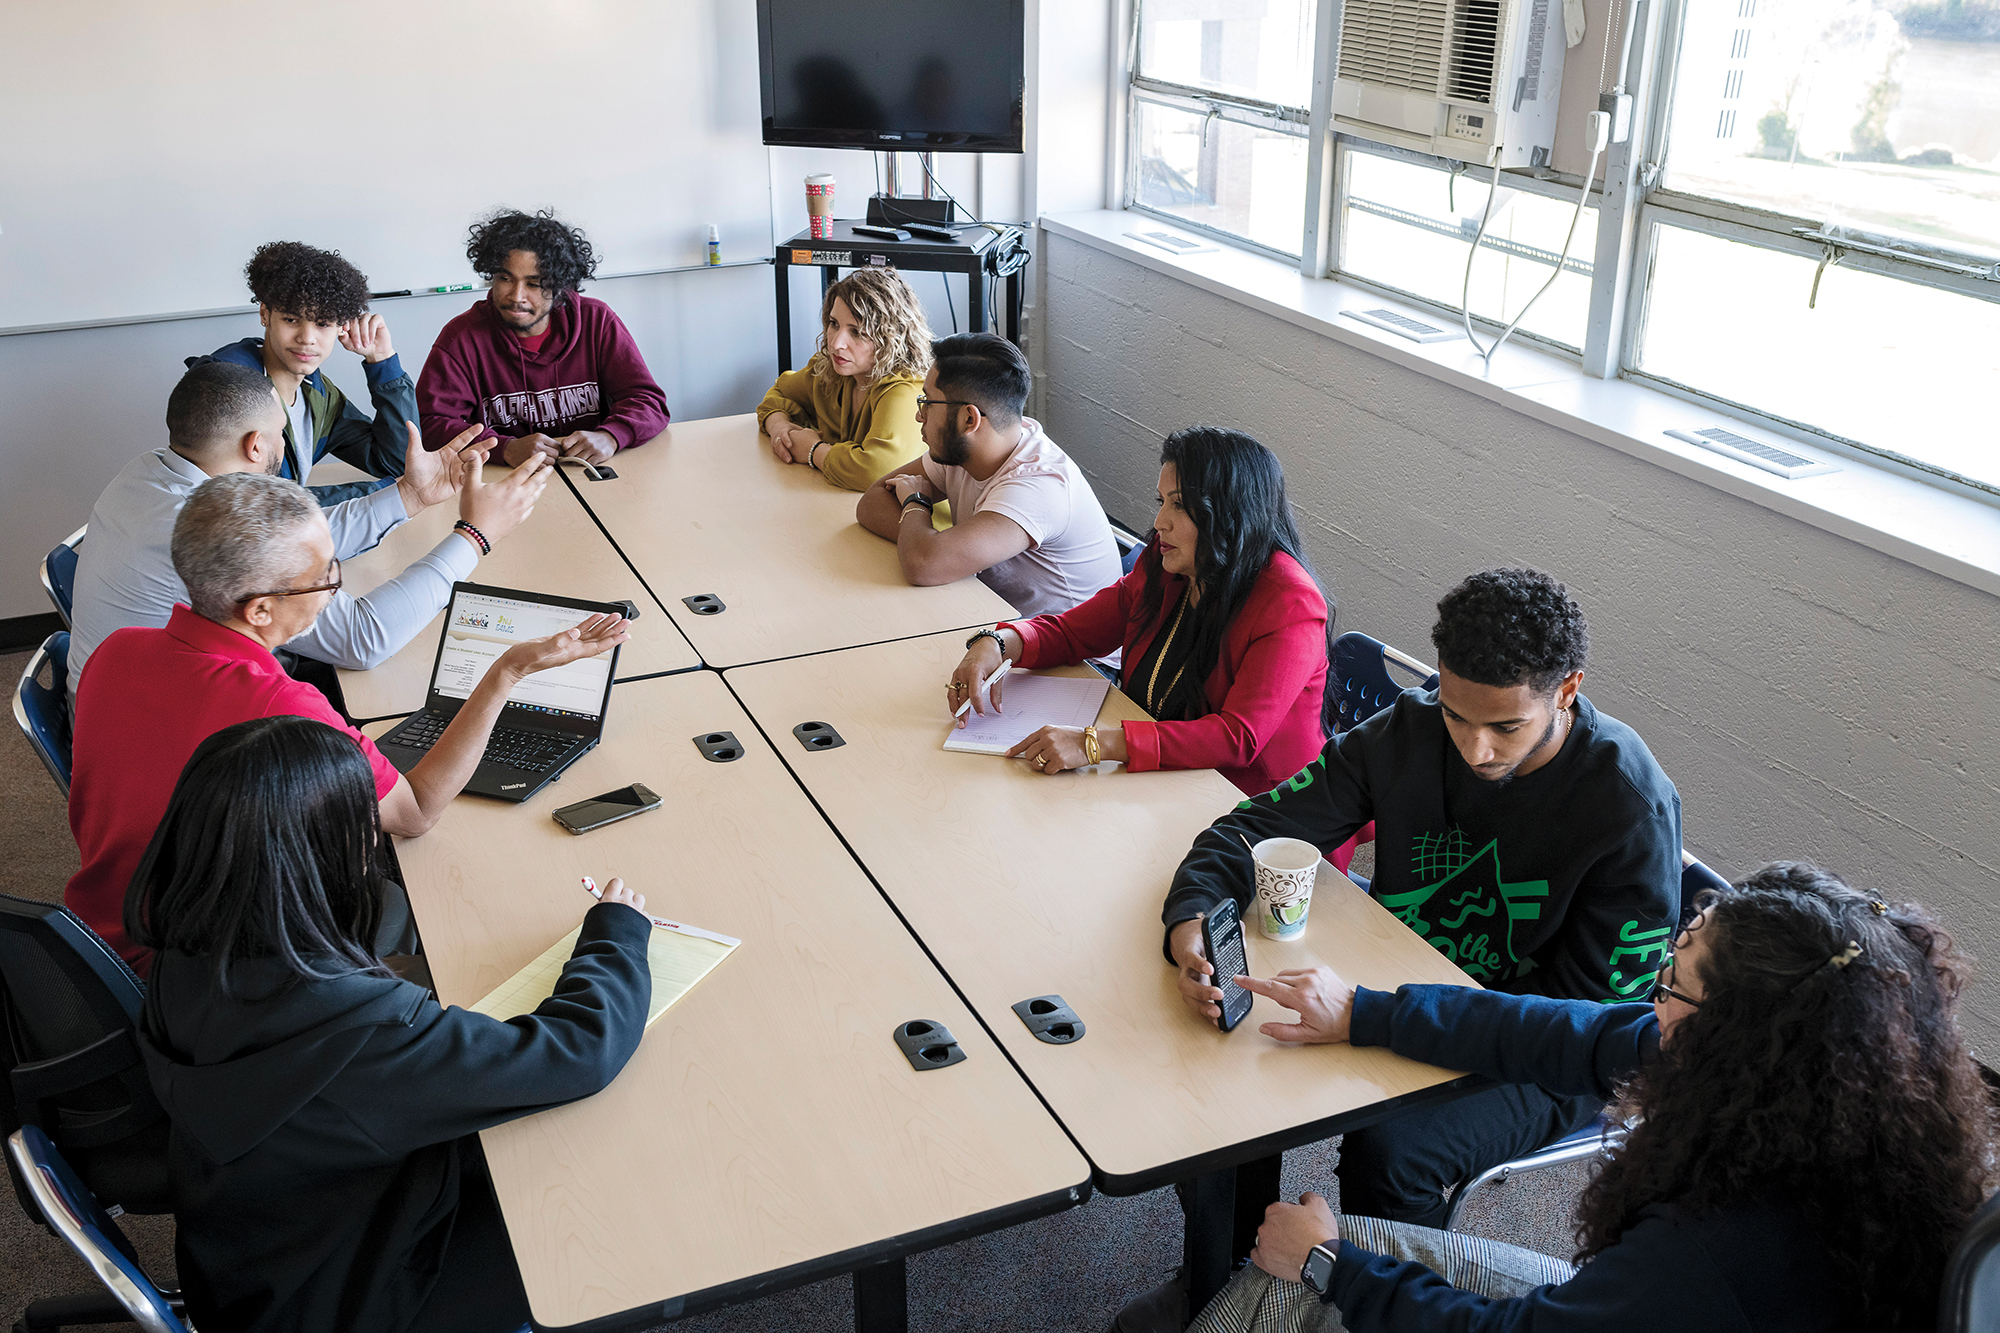 A group of faculty, students and staff sit and meet at a conference table.